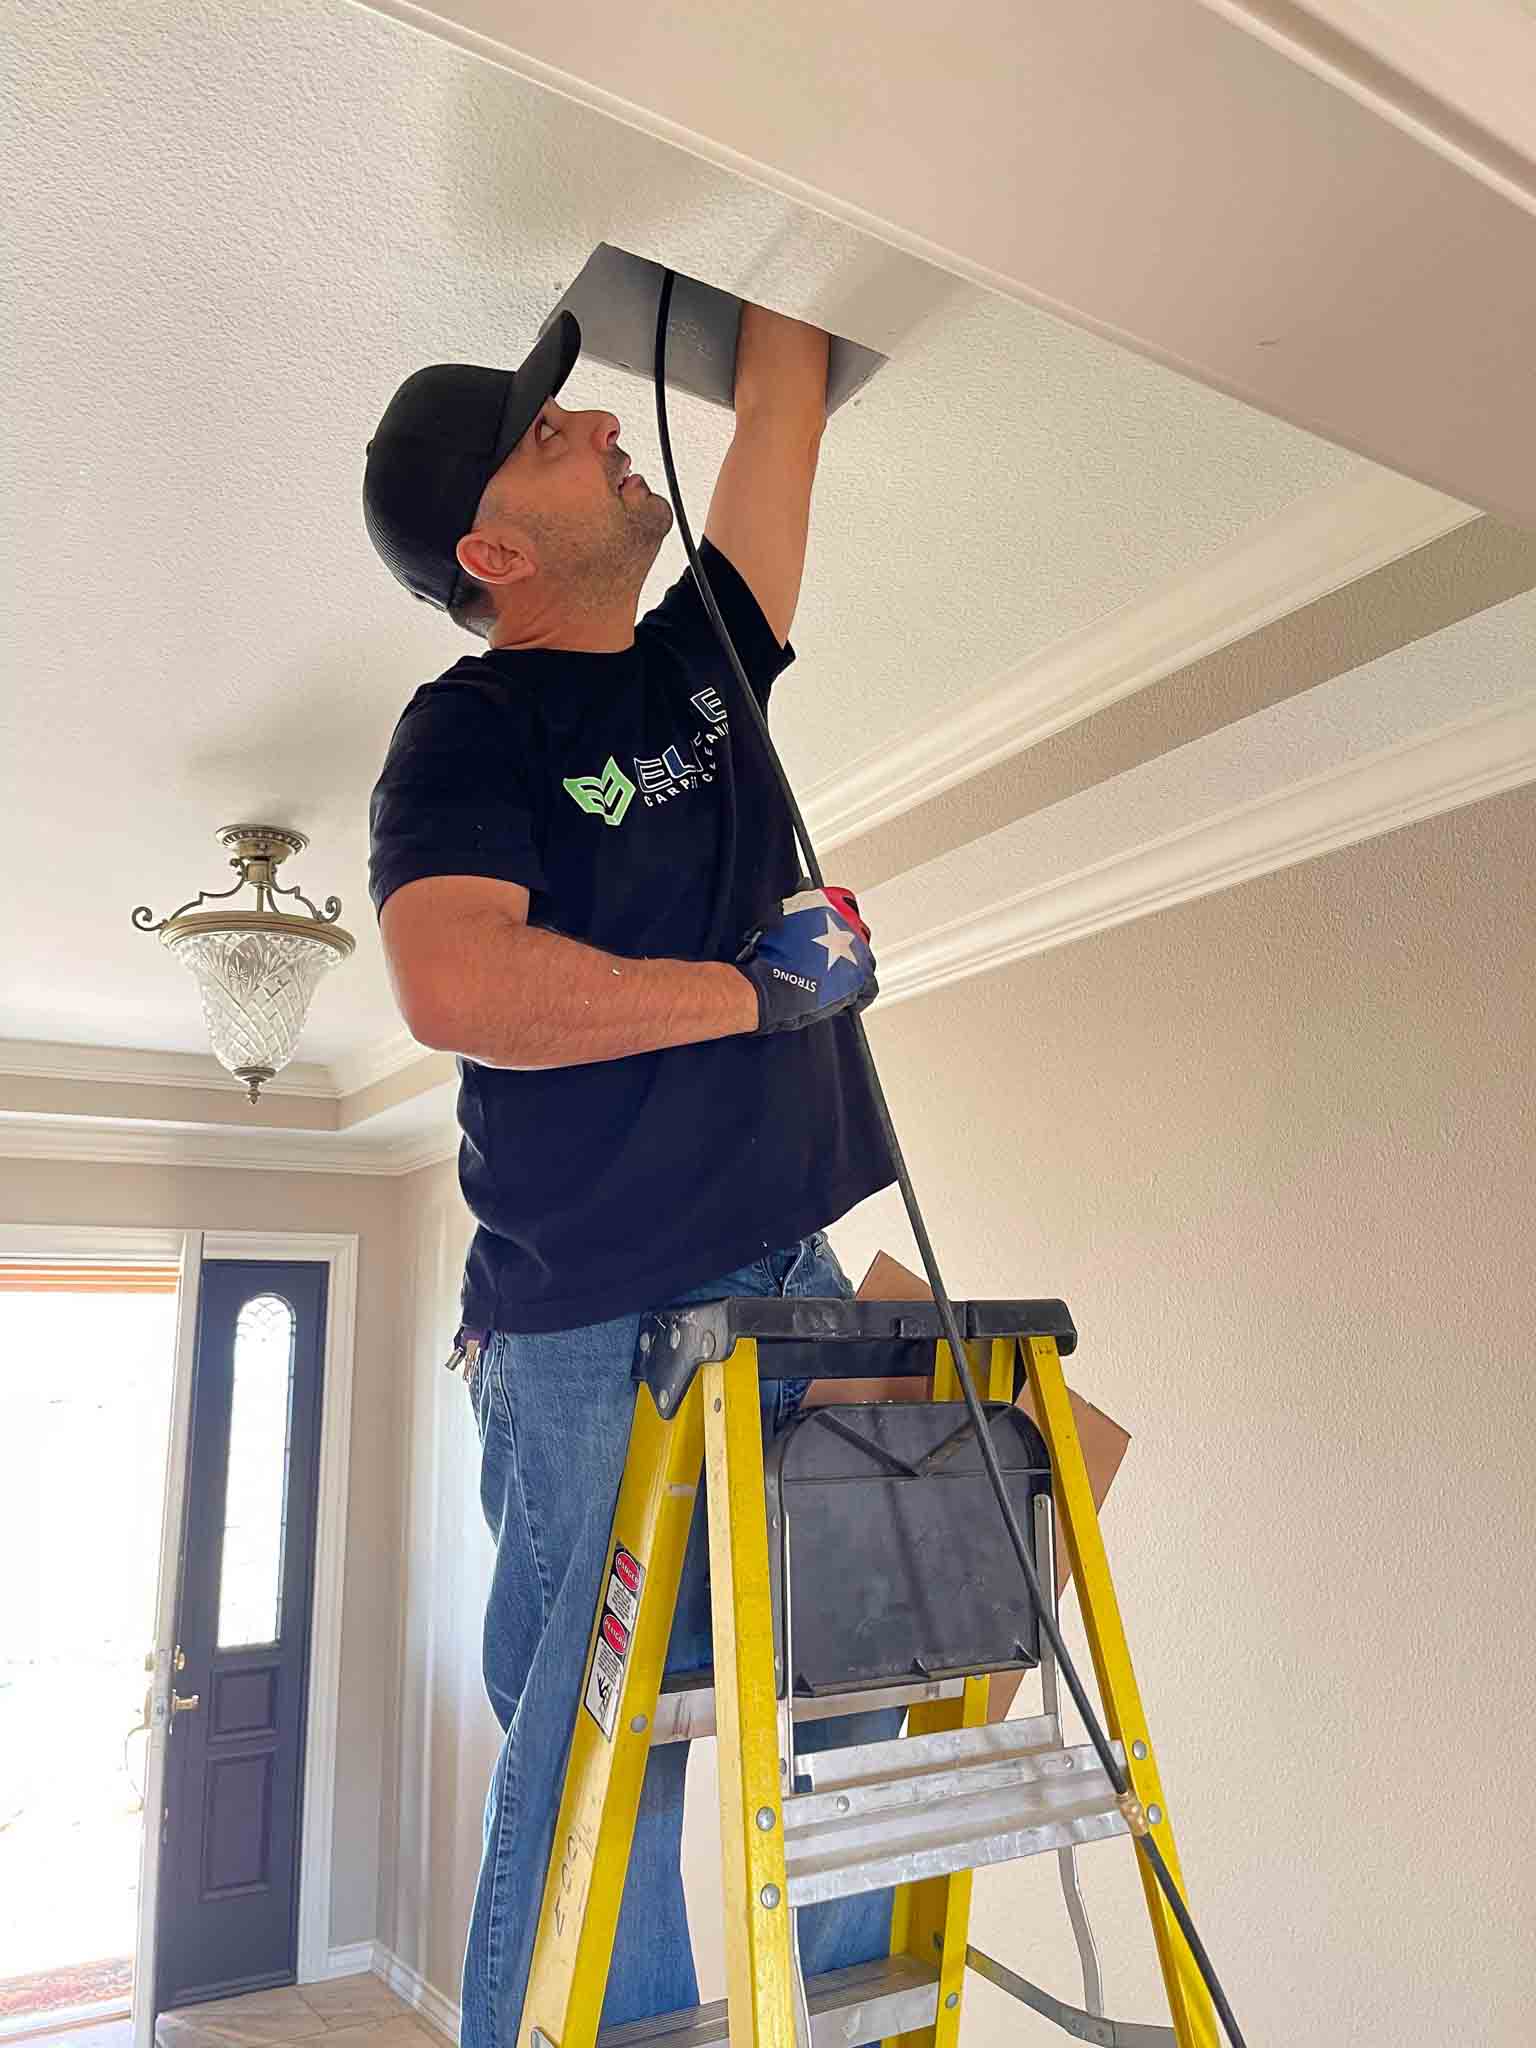 Air Duct being cleaned by Michael Mendoza of Elite Carpet Cleaning in Monahans Tx 